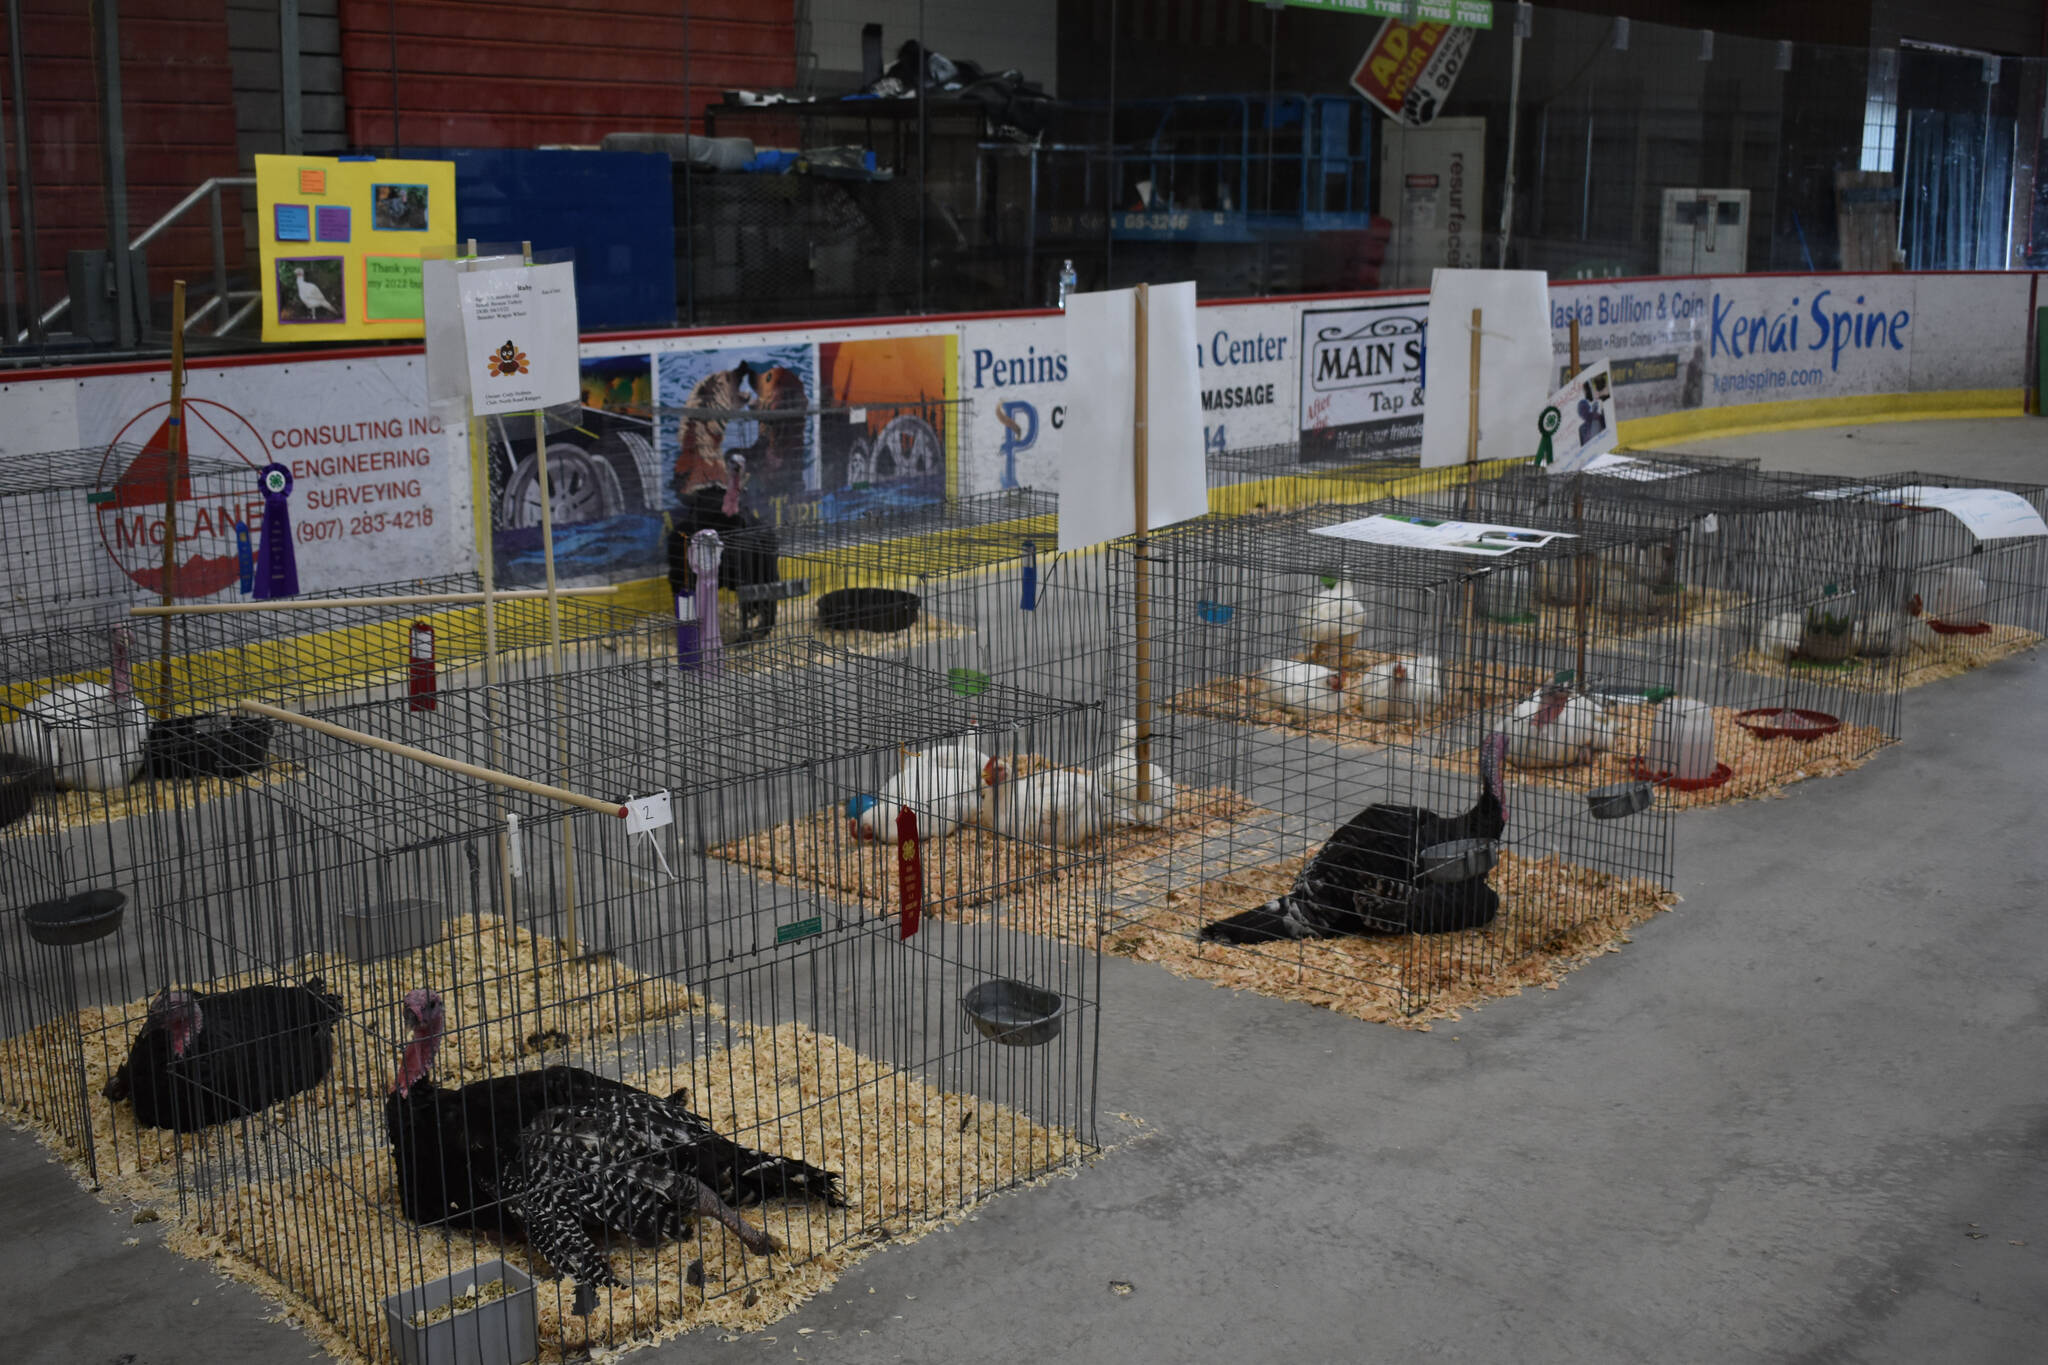 Turkeys on display at the 4-H Agriculture Expo in Soldotna, Alaska, on Aug. 5, 2022. (Jake Dye/Peninsula Clarion)